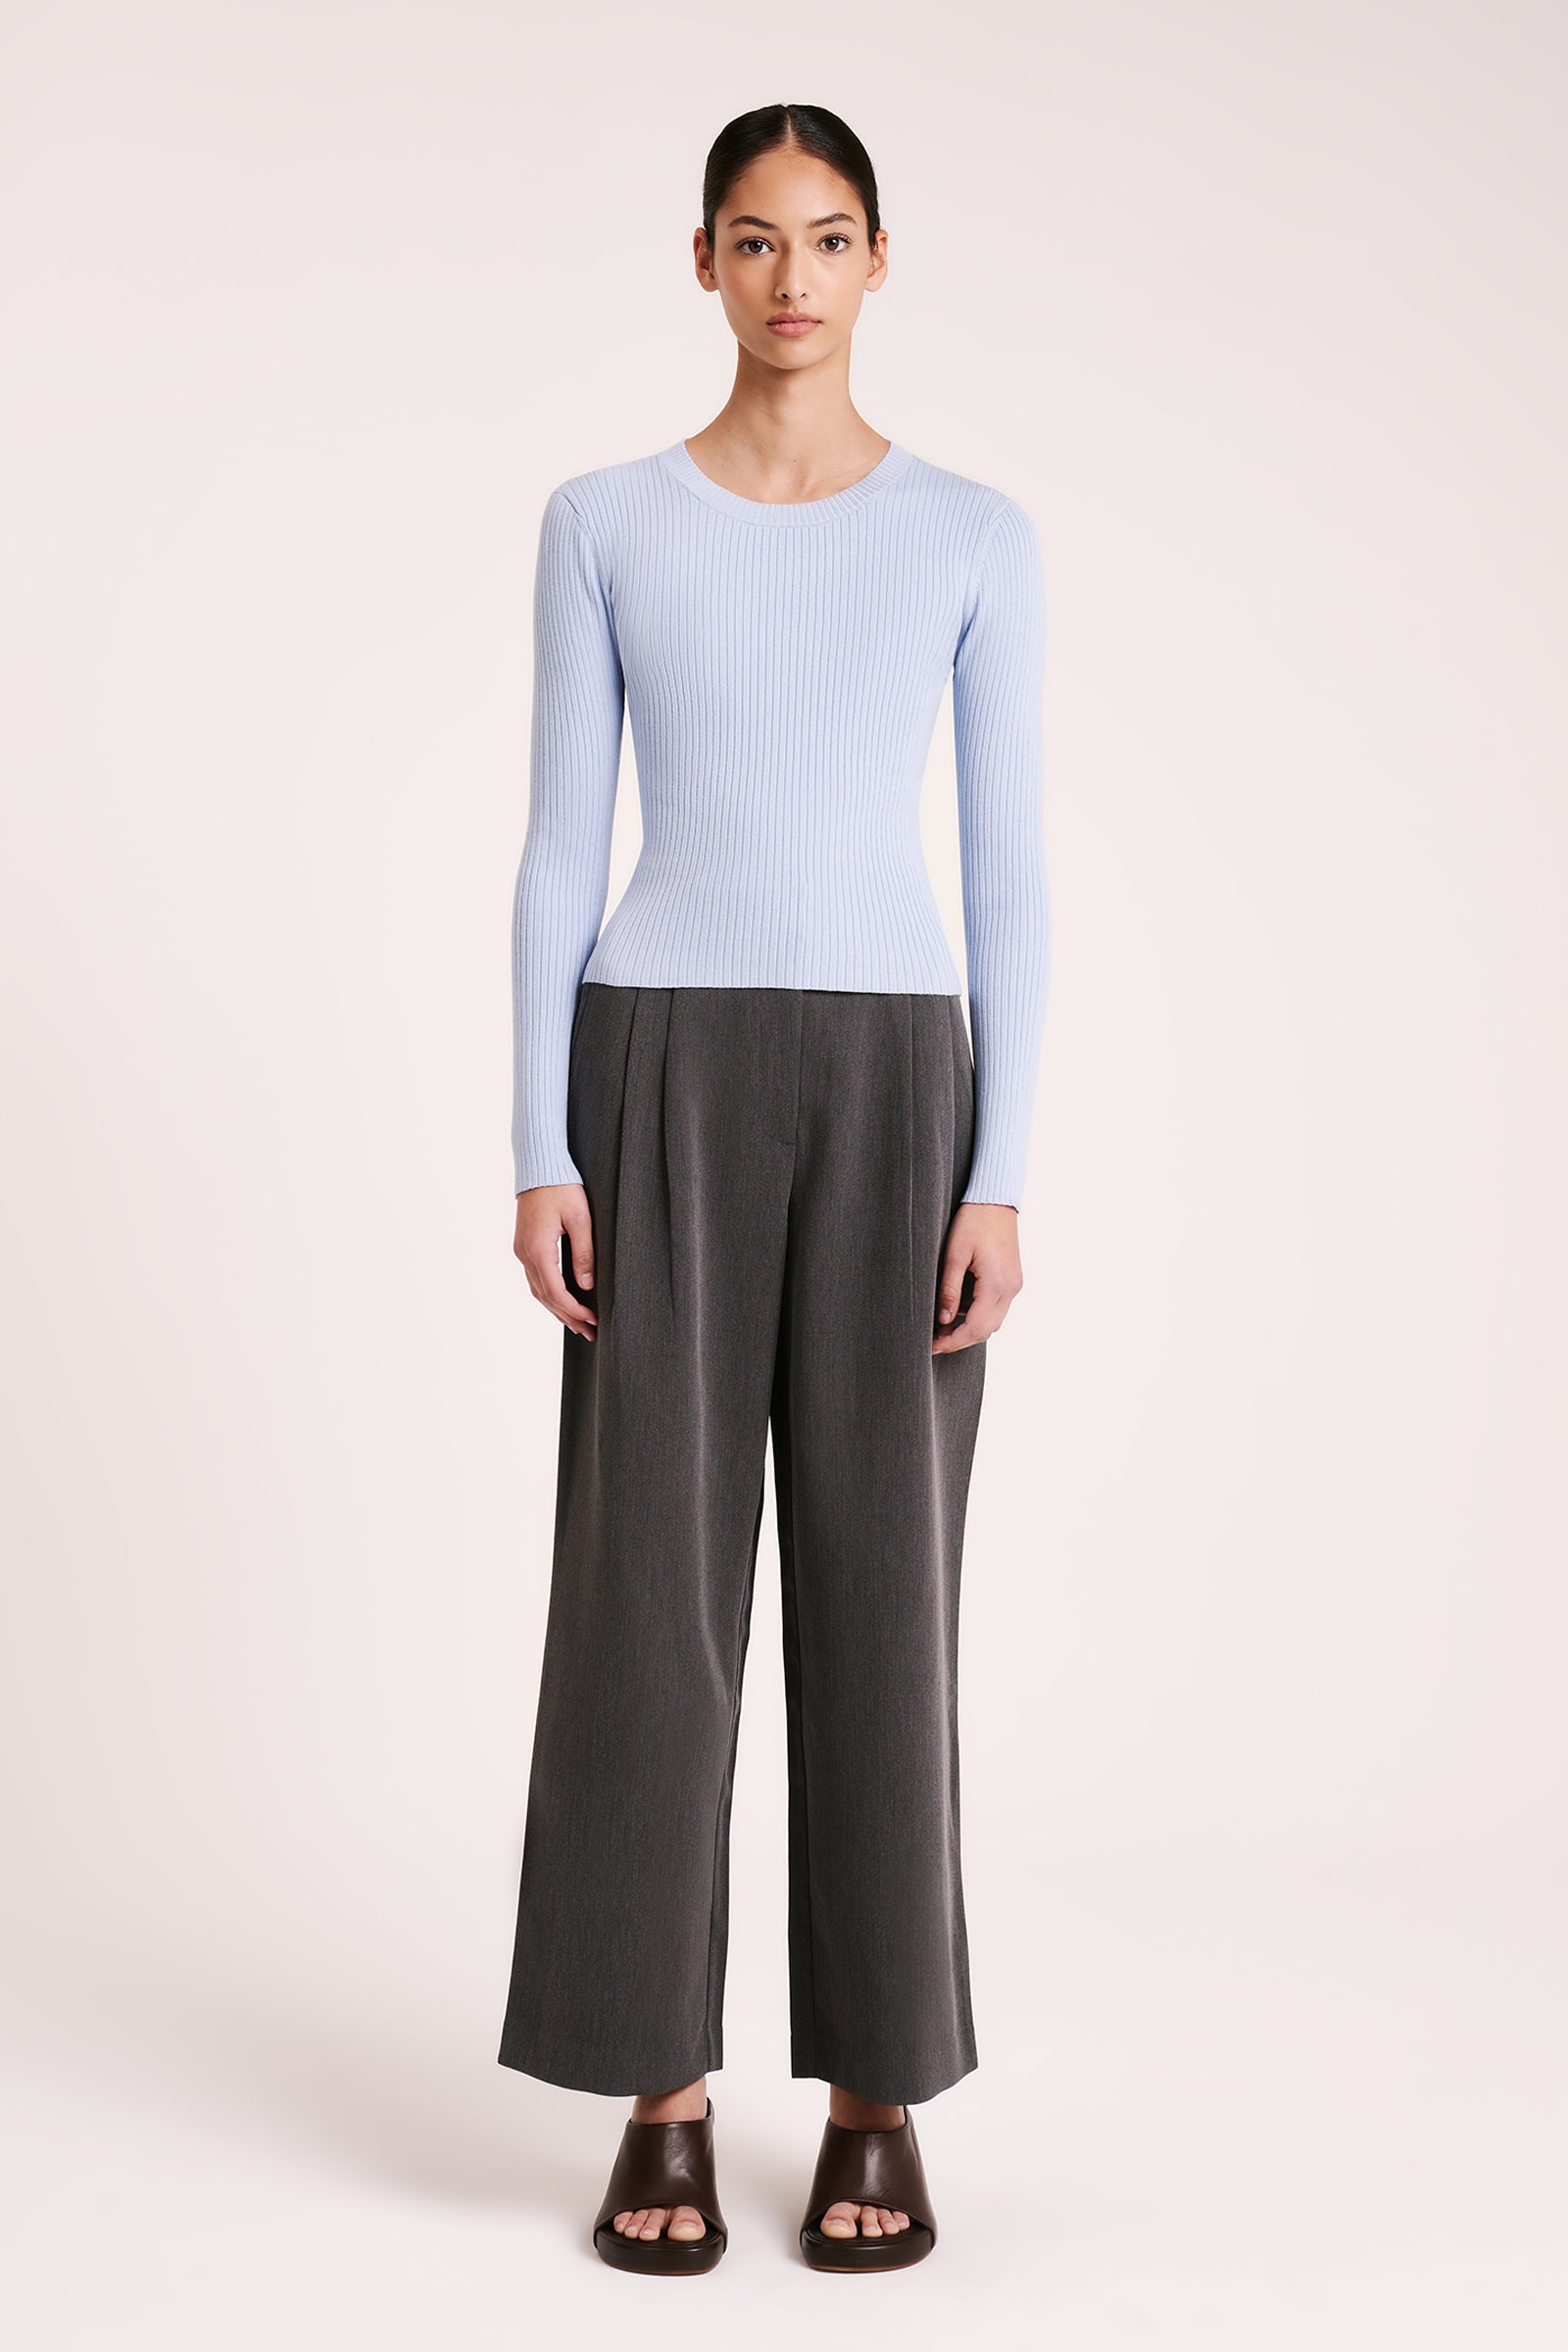 Nude Lucy | Nude Classic Knit - Mineral Blue